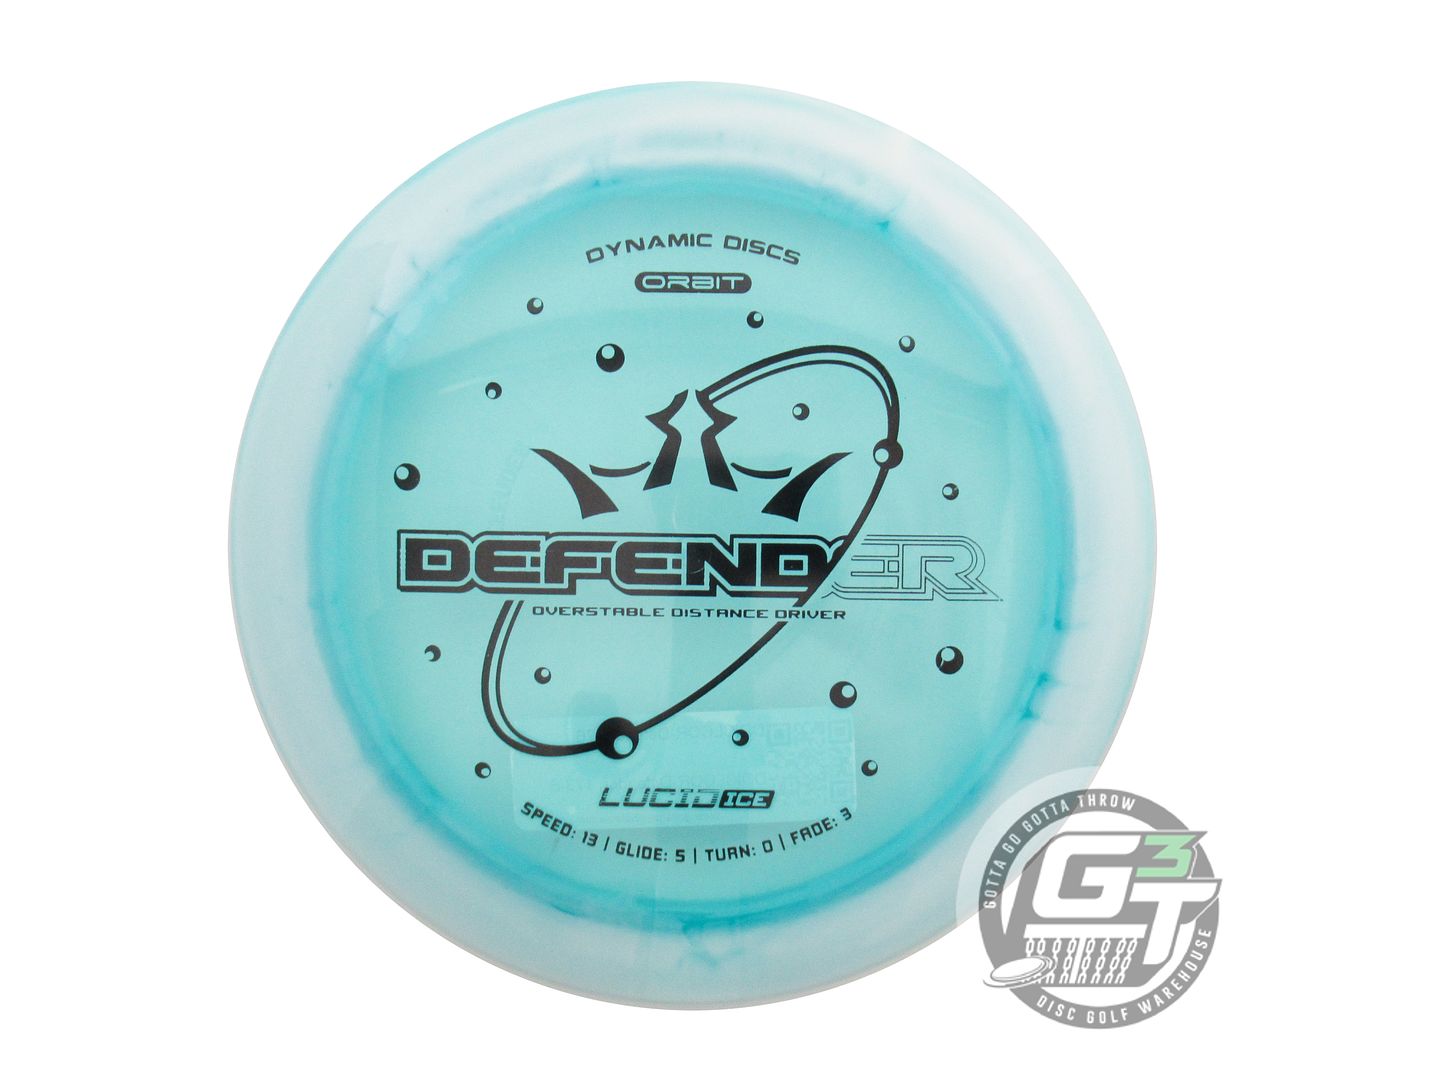 Dynamic Discs Lucid Ice Orbit Defender Distance Driver Golf Disc (Individually Listed)